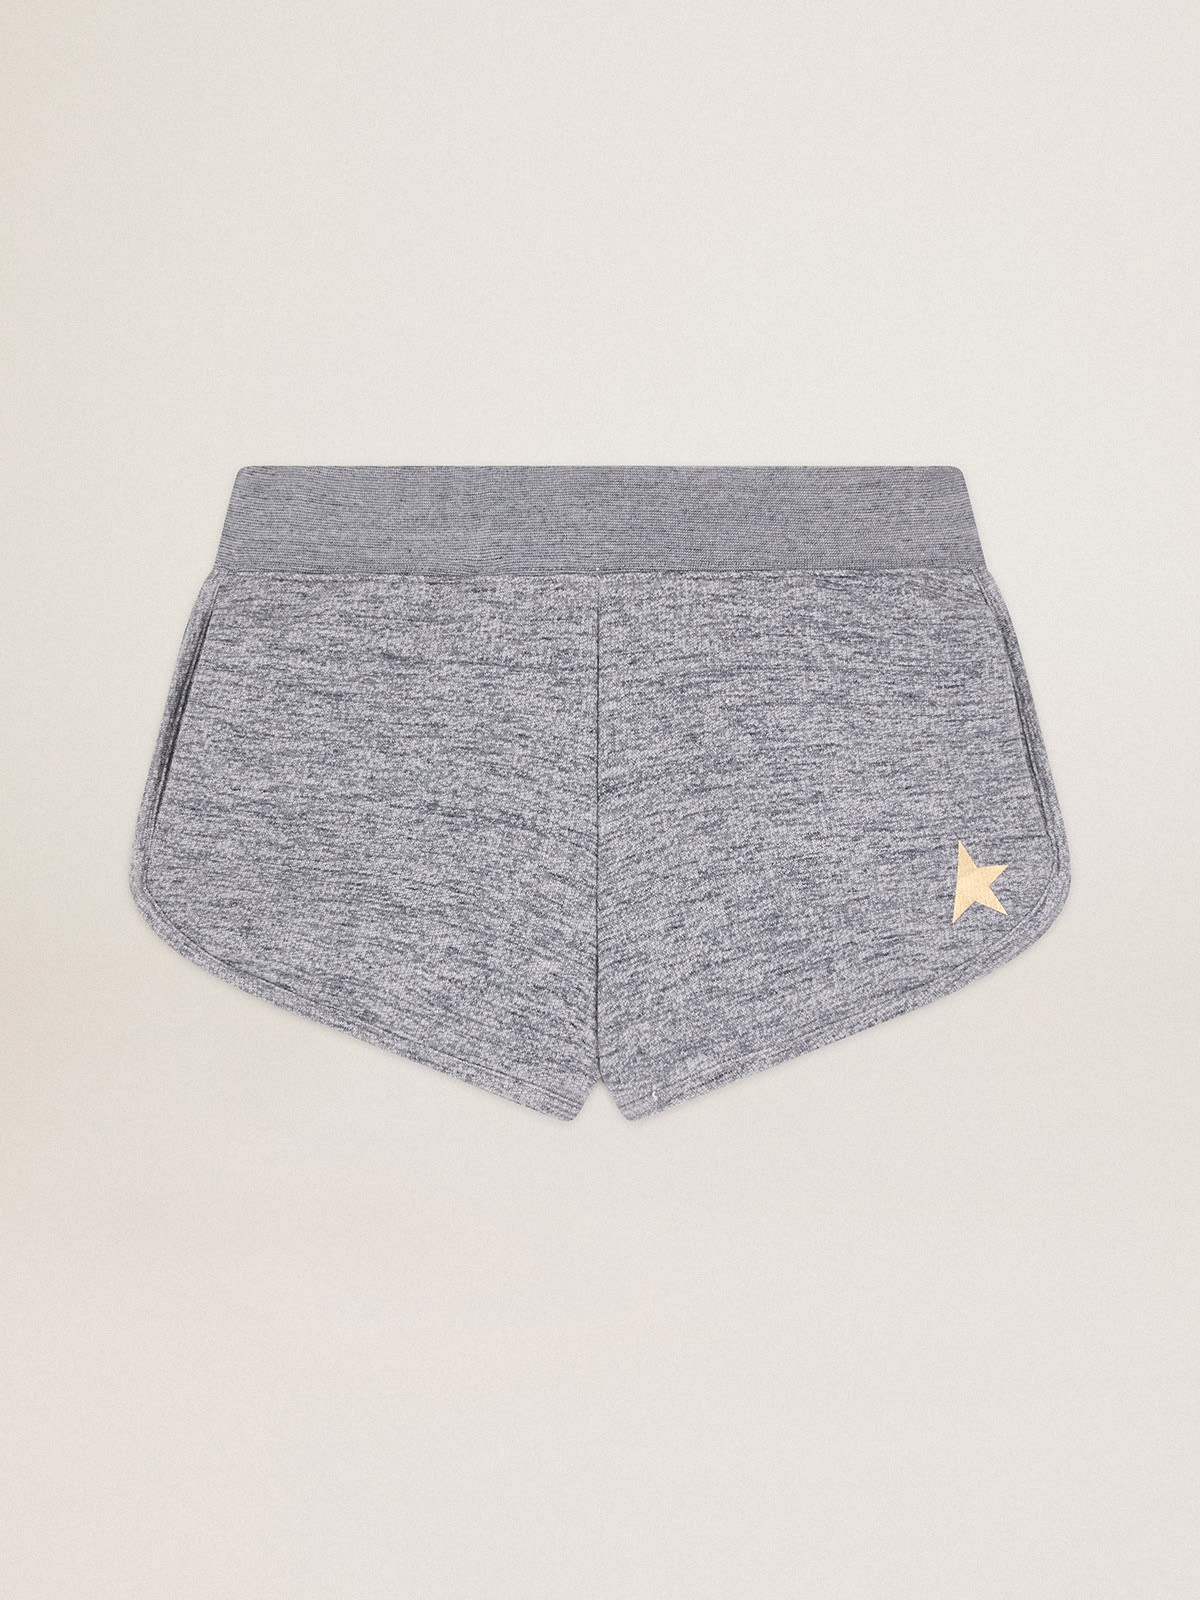 Melange gray shorts with gold star - 1